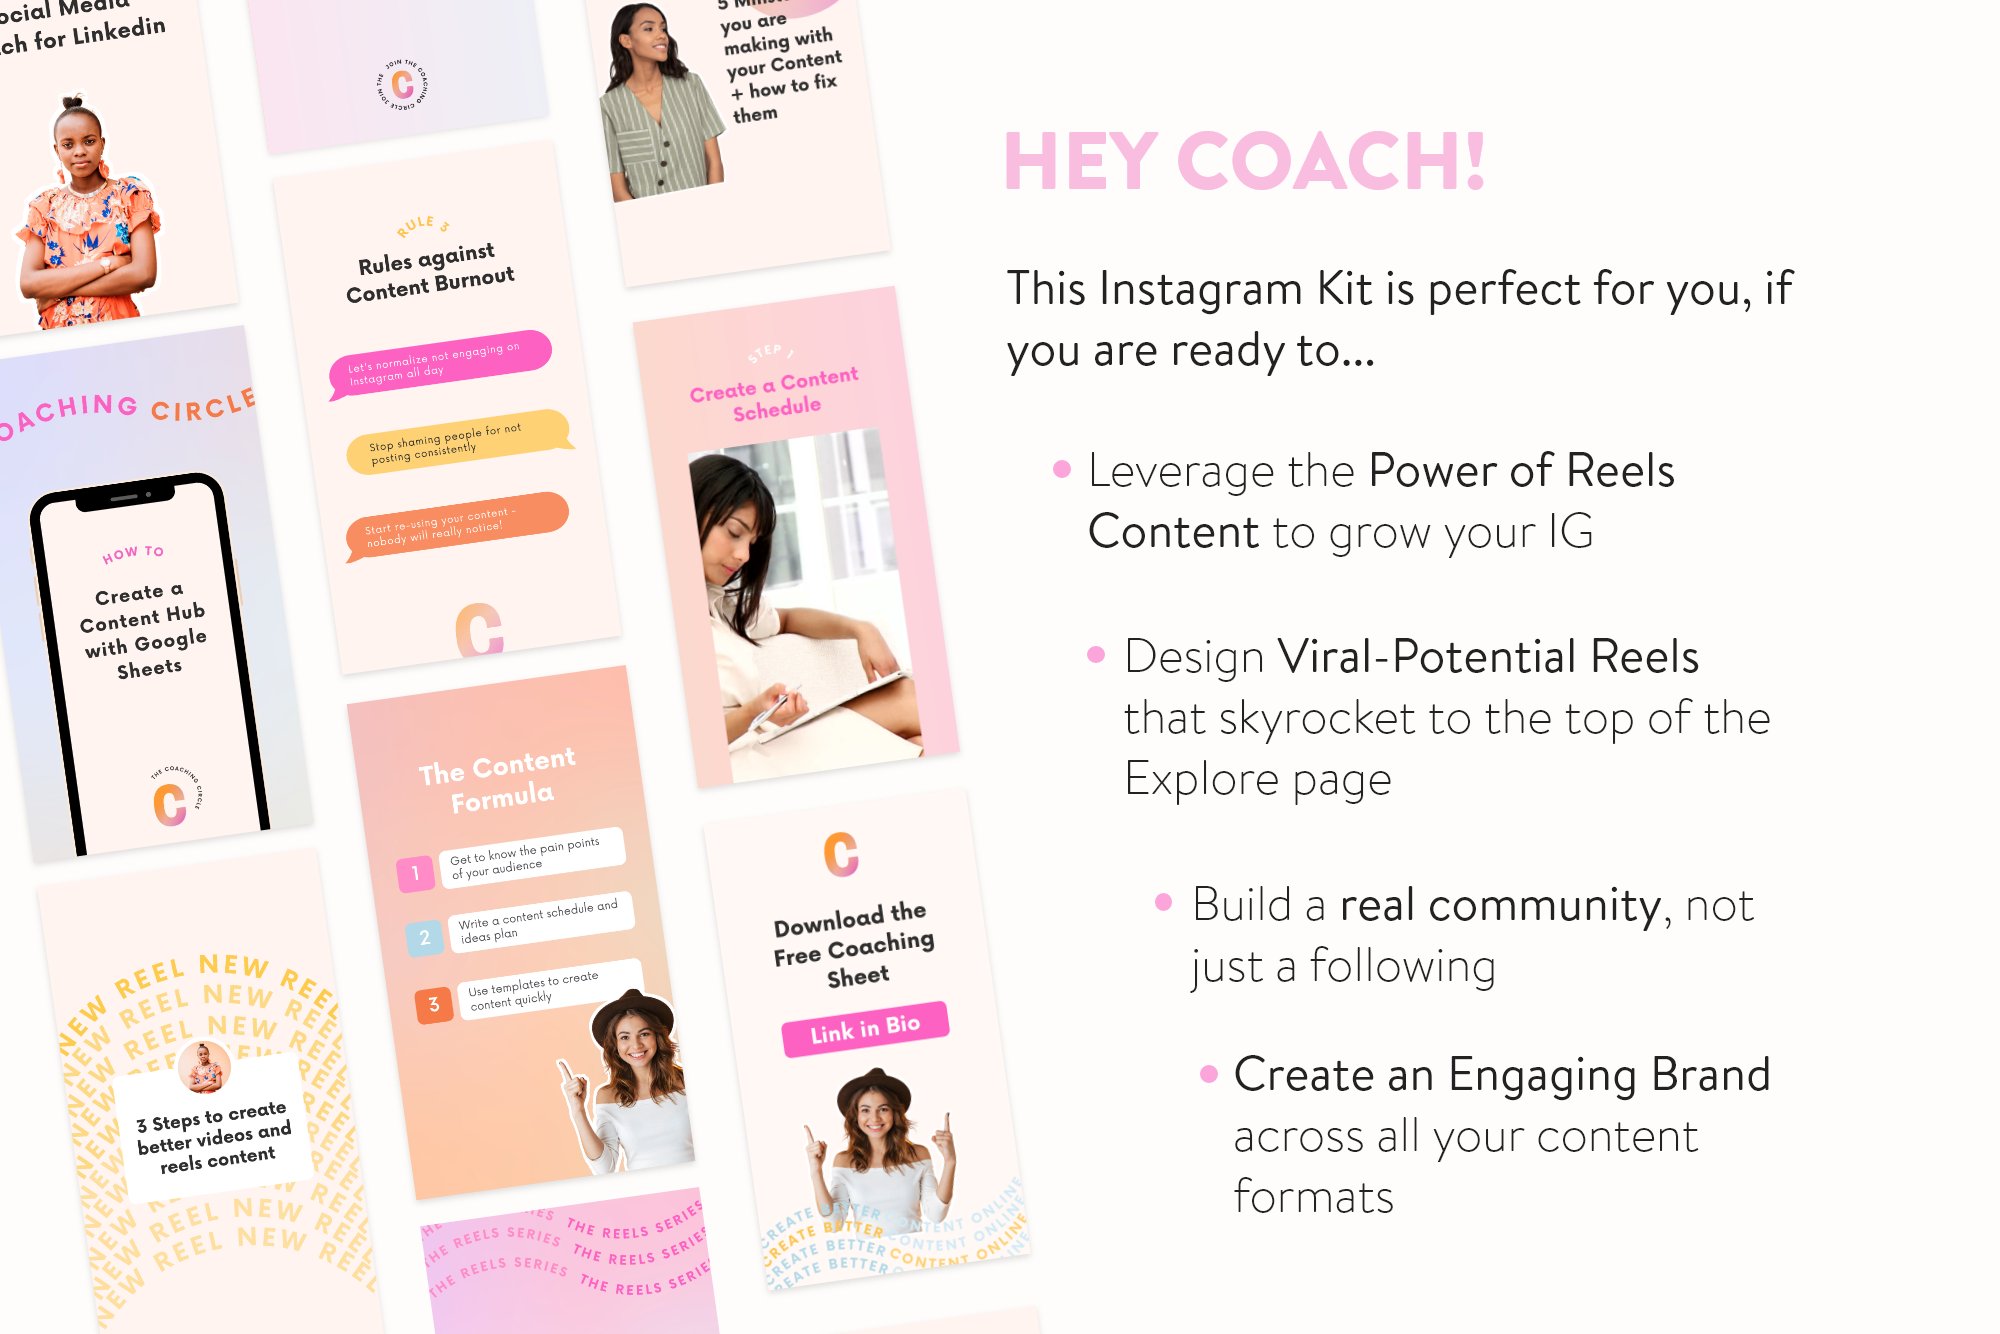 This instagram pack is perfect for you.